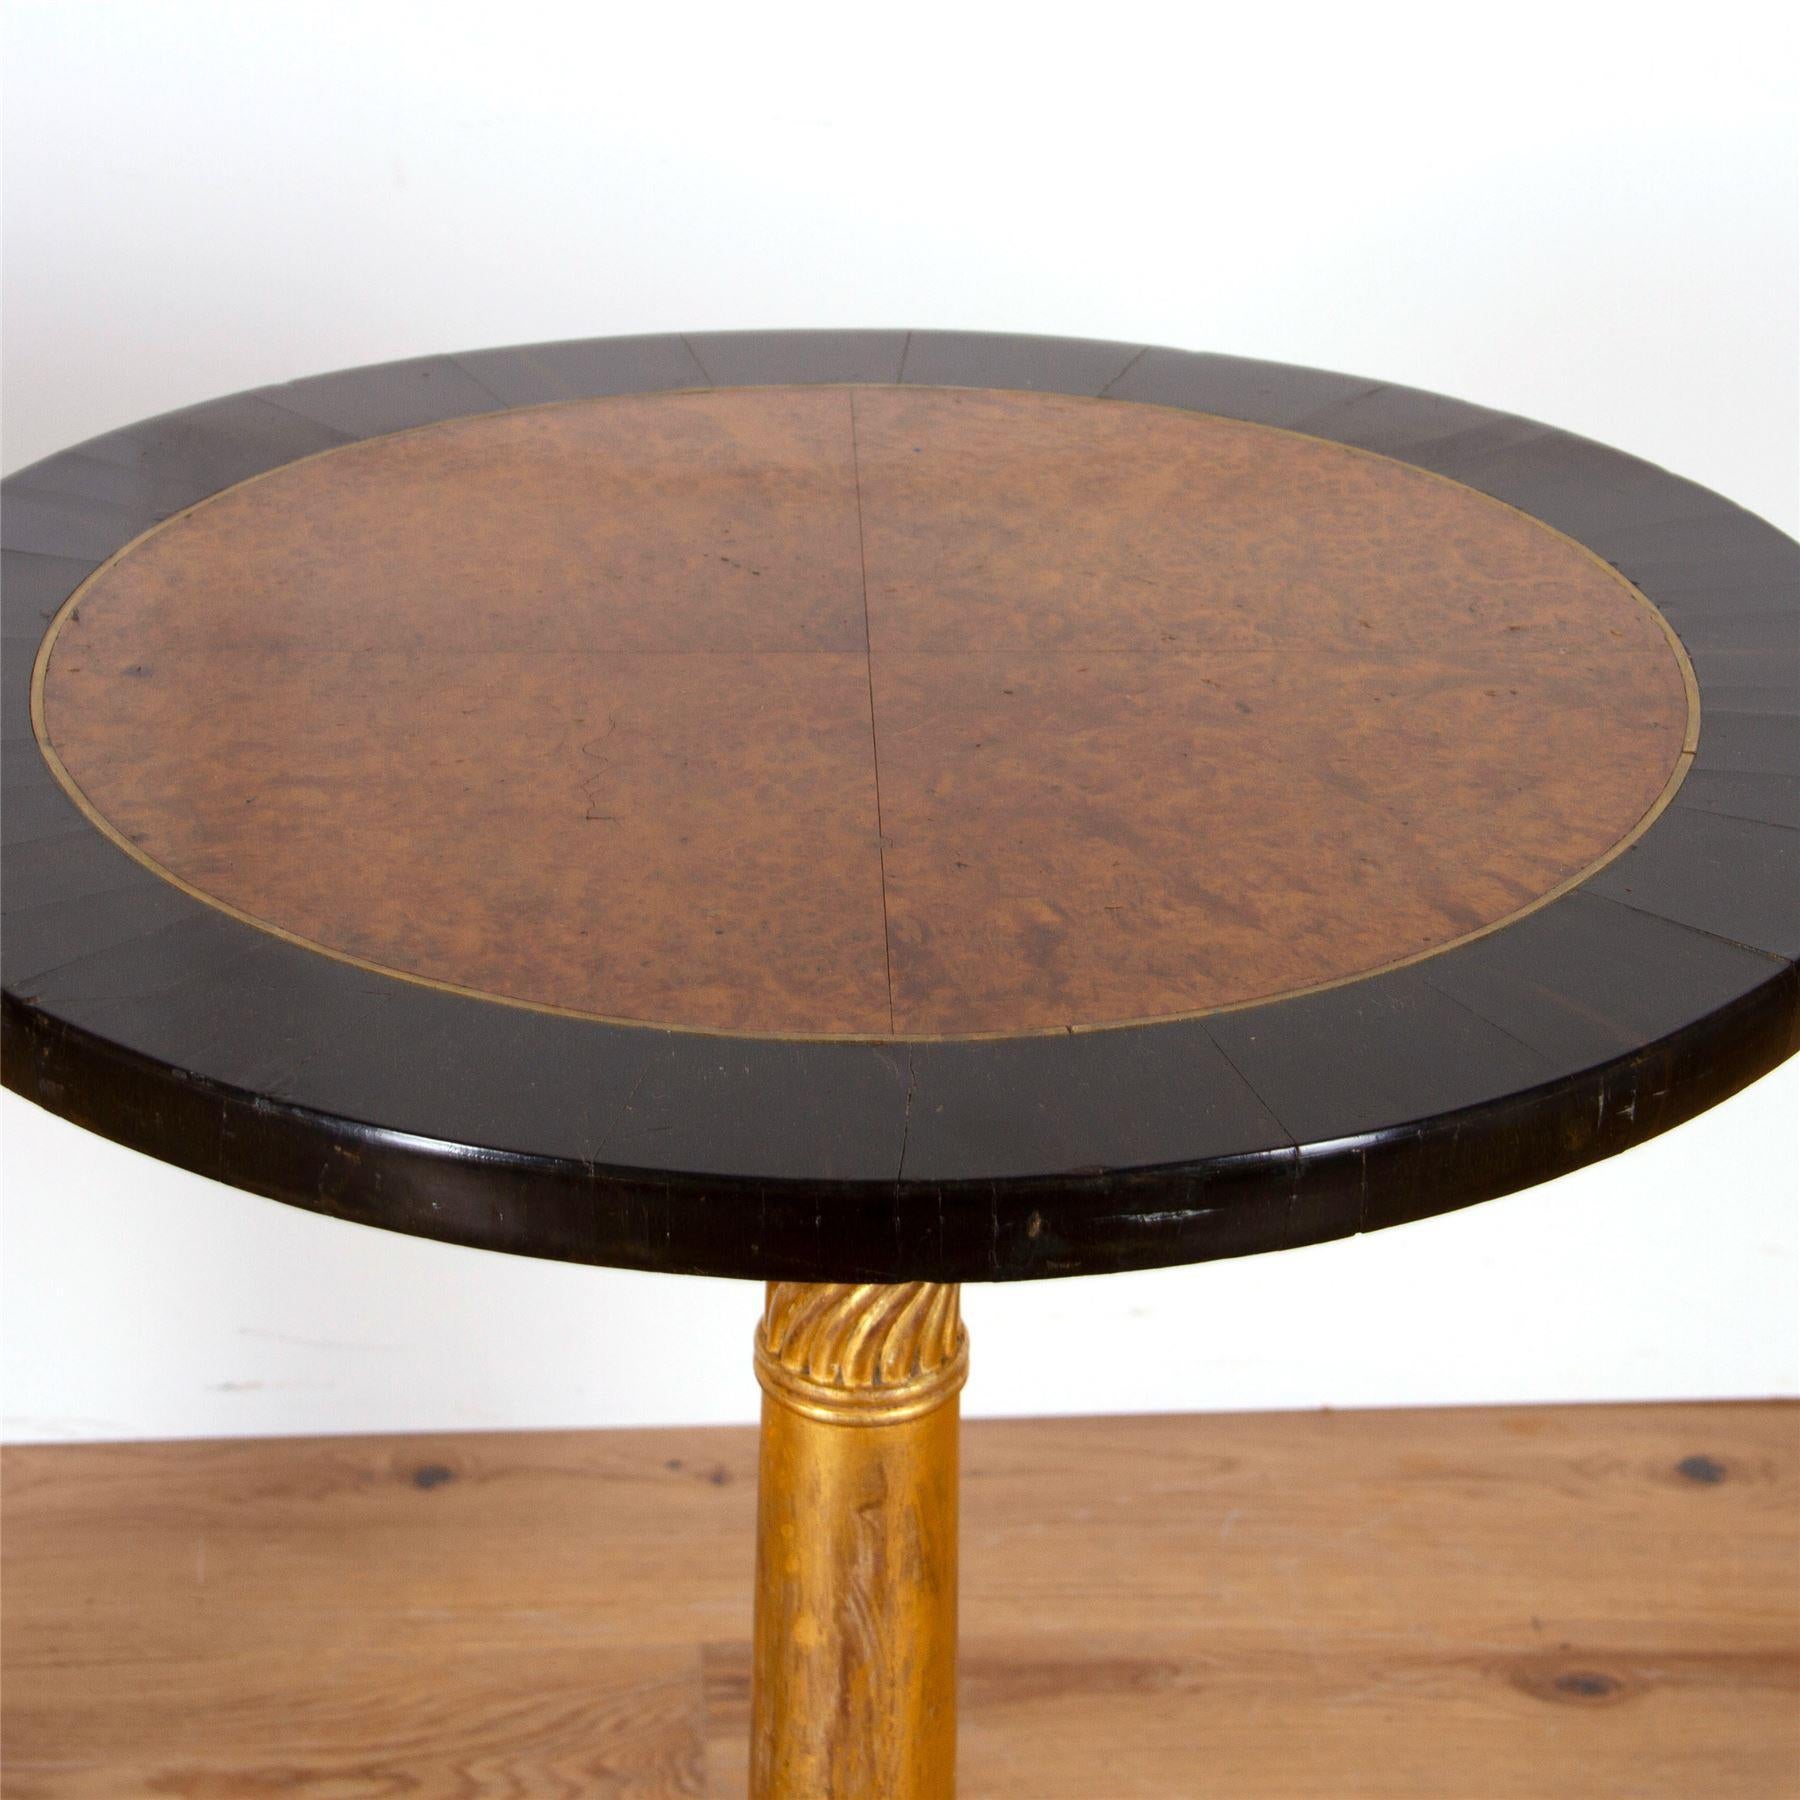 English Pair of Early 19th Century Amboyna Ebony and Parcel Gilt Side Tables For Sale